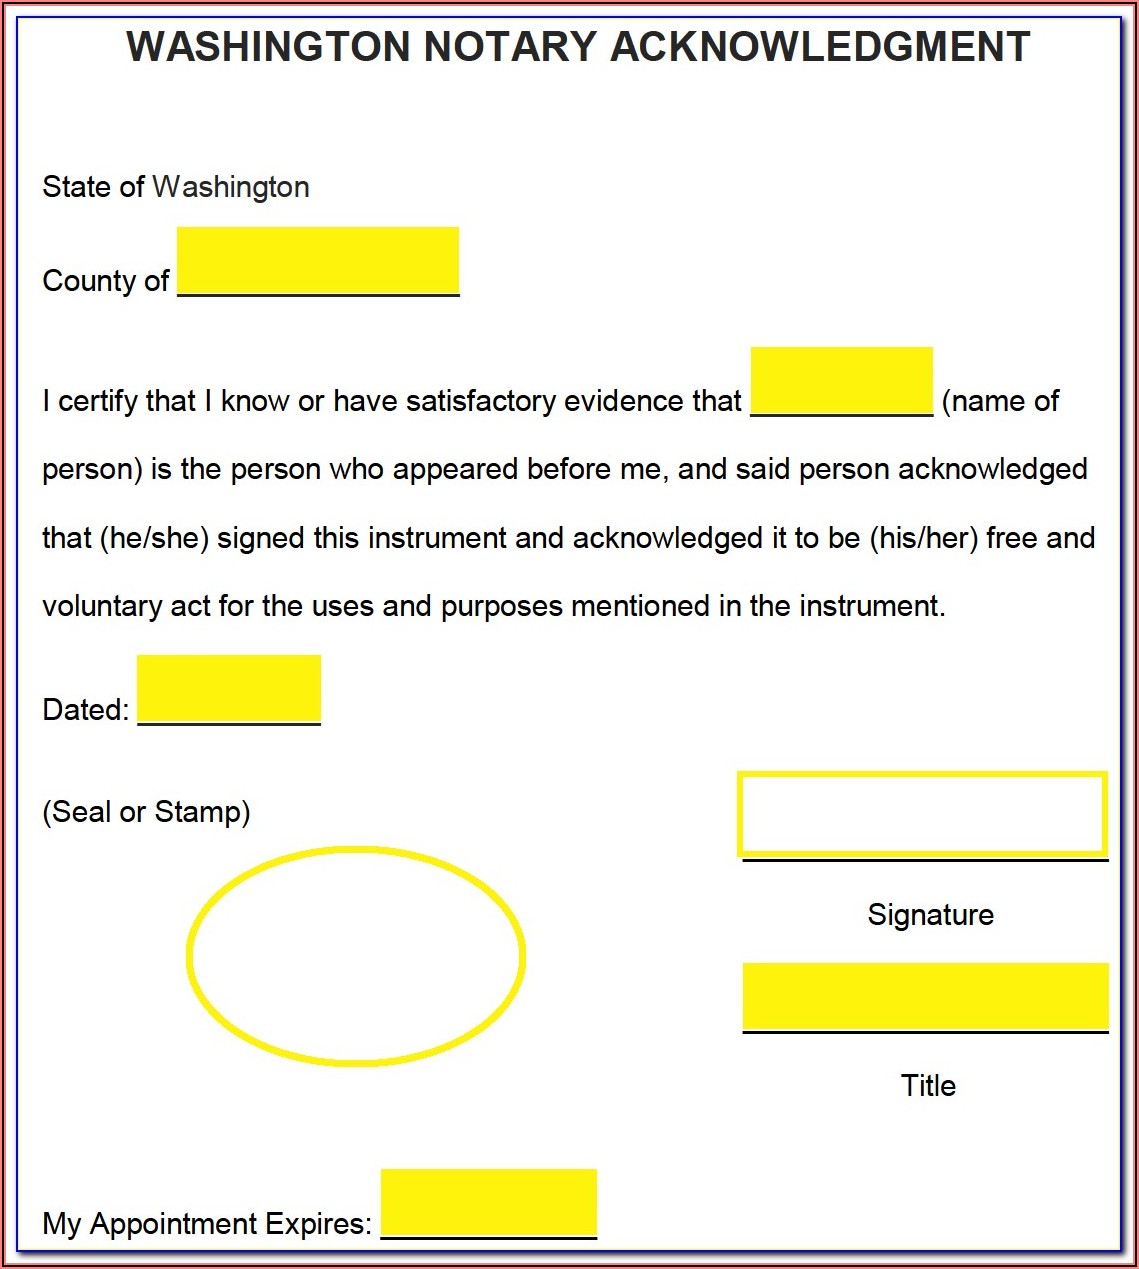 Ca Notary Acceptable Forms Of Id